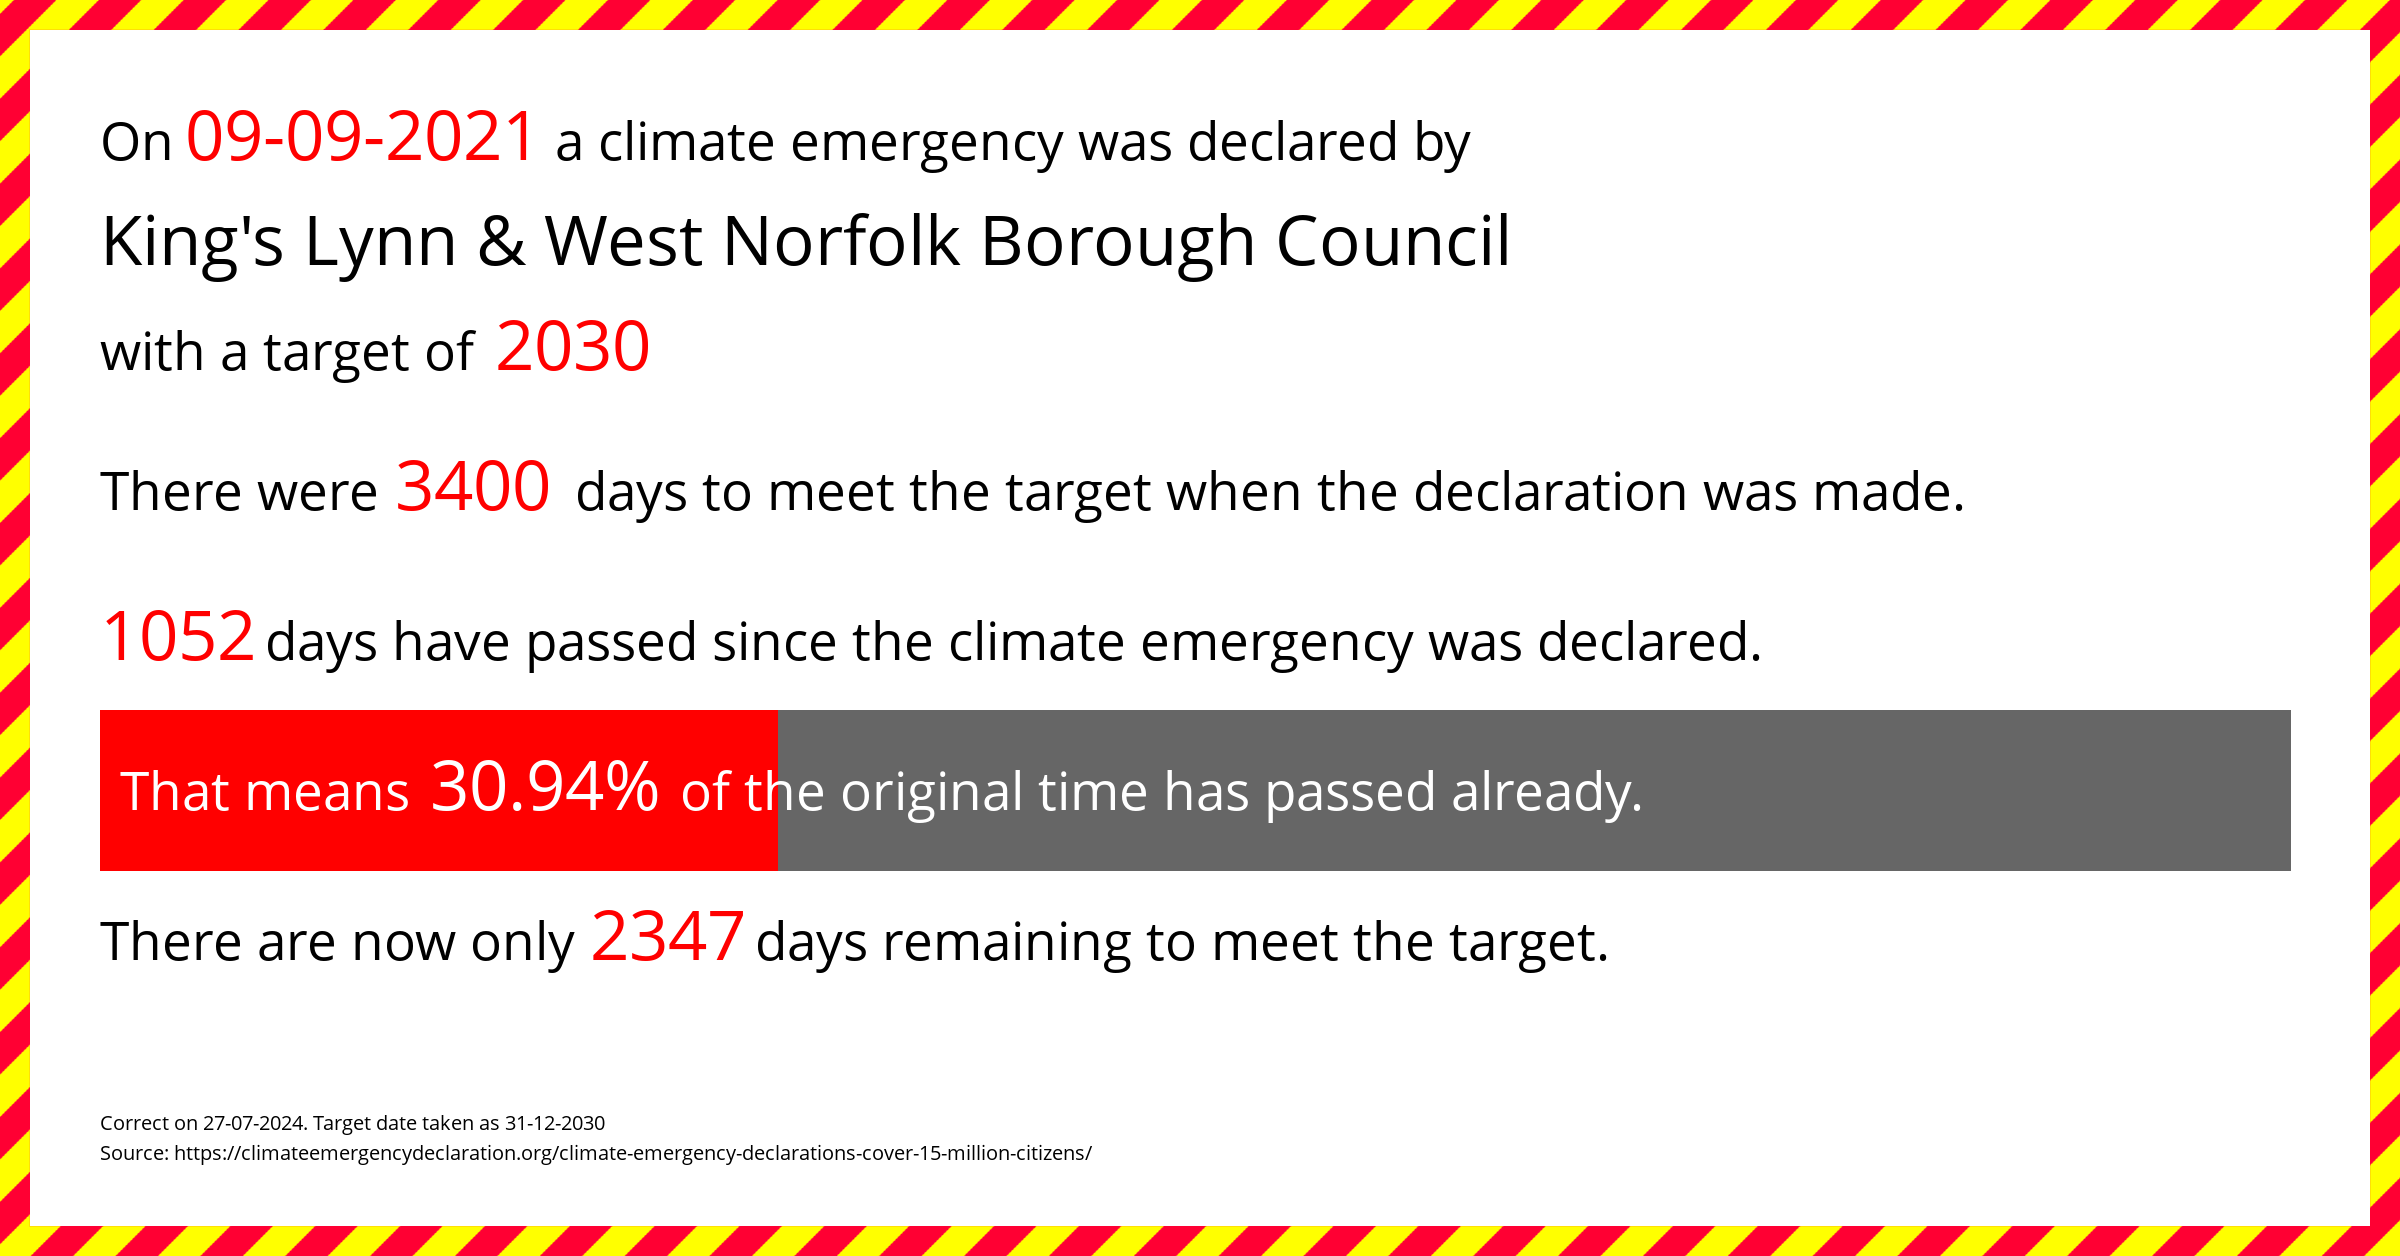 King's Lynn & West Norfolk Borough Council  declared a Climate emergency on Thursday 9th September 2021, with a target of 2030.